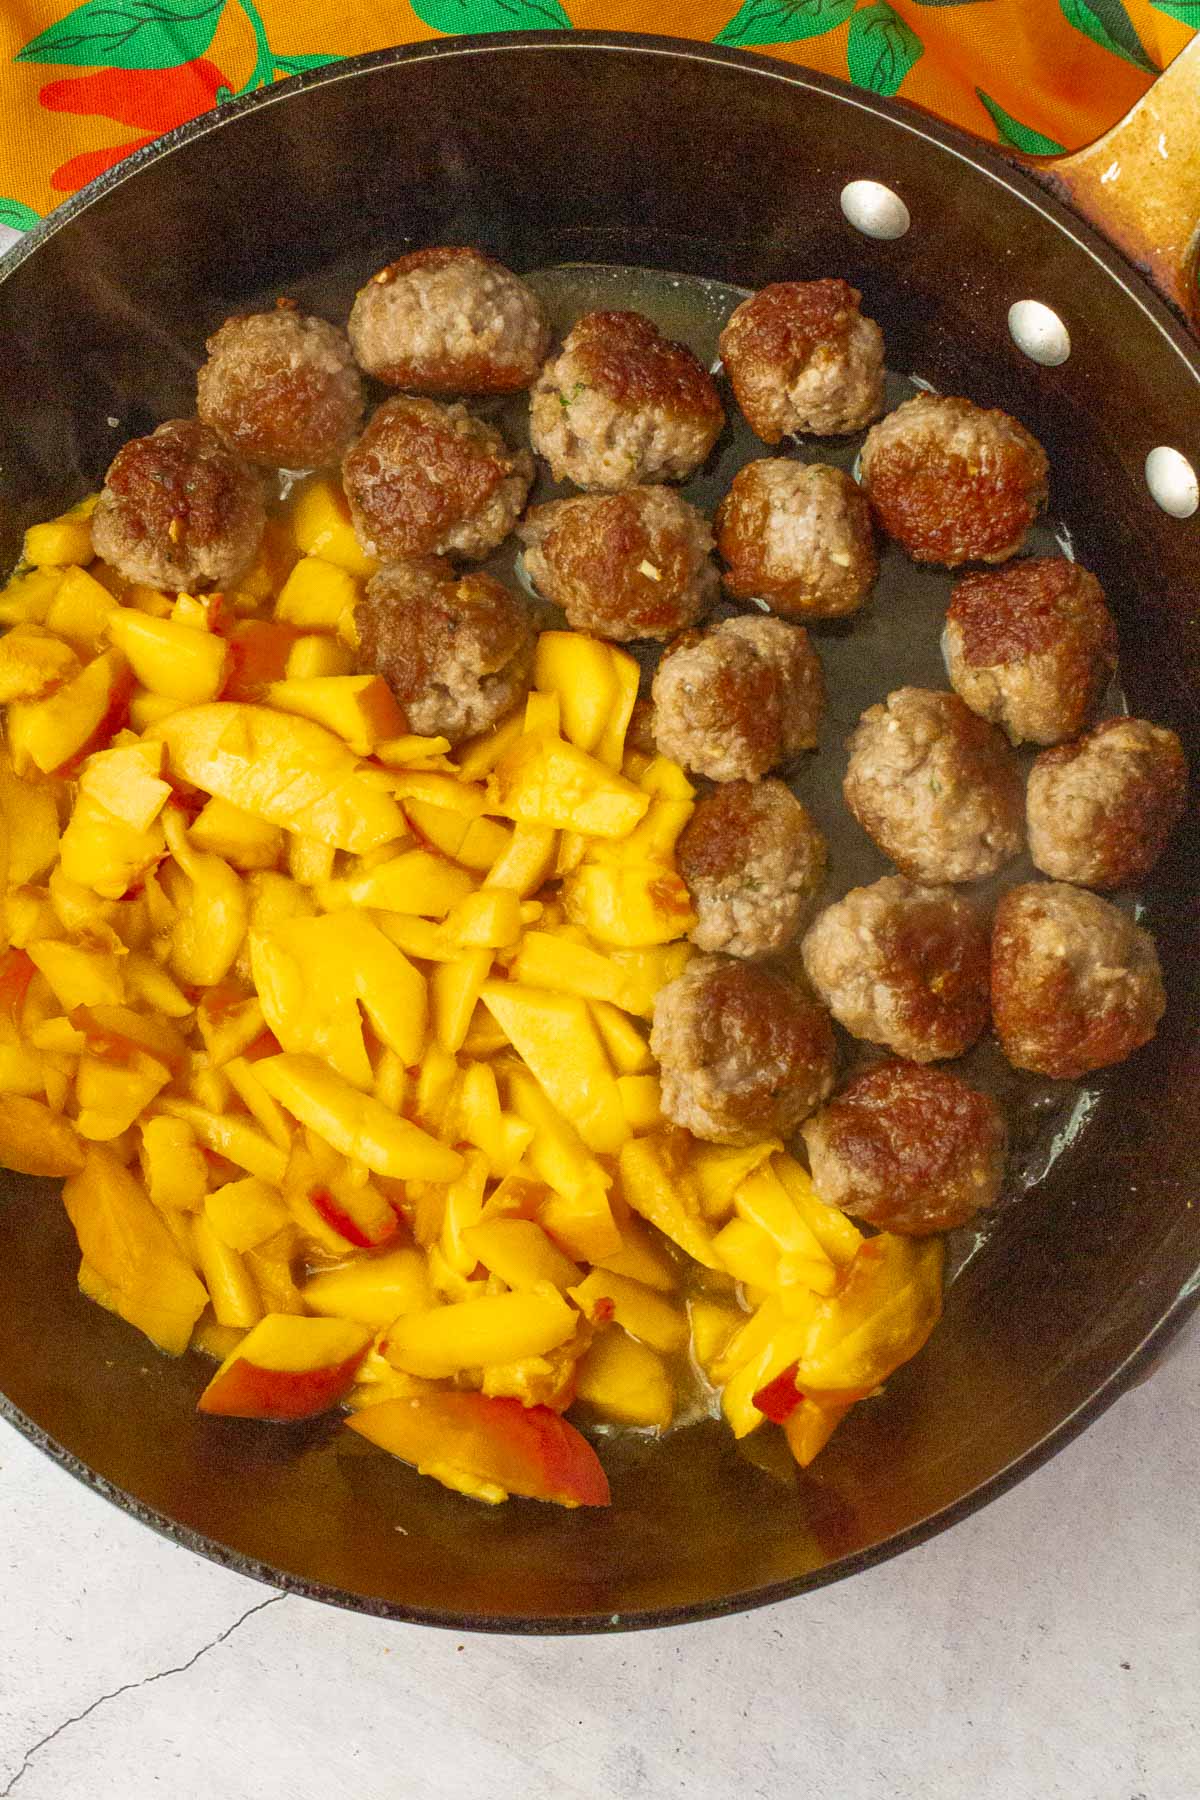 Frying pork meatballs in a skillet with peaches.